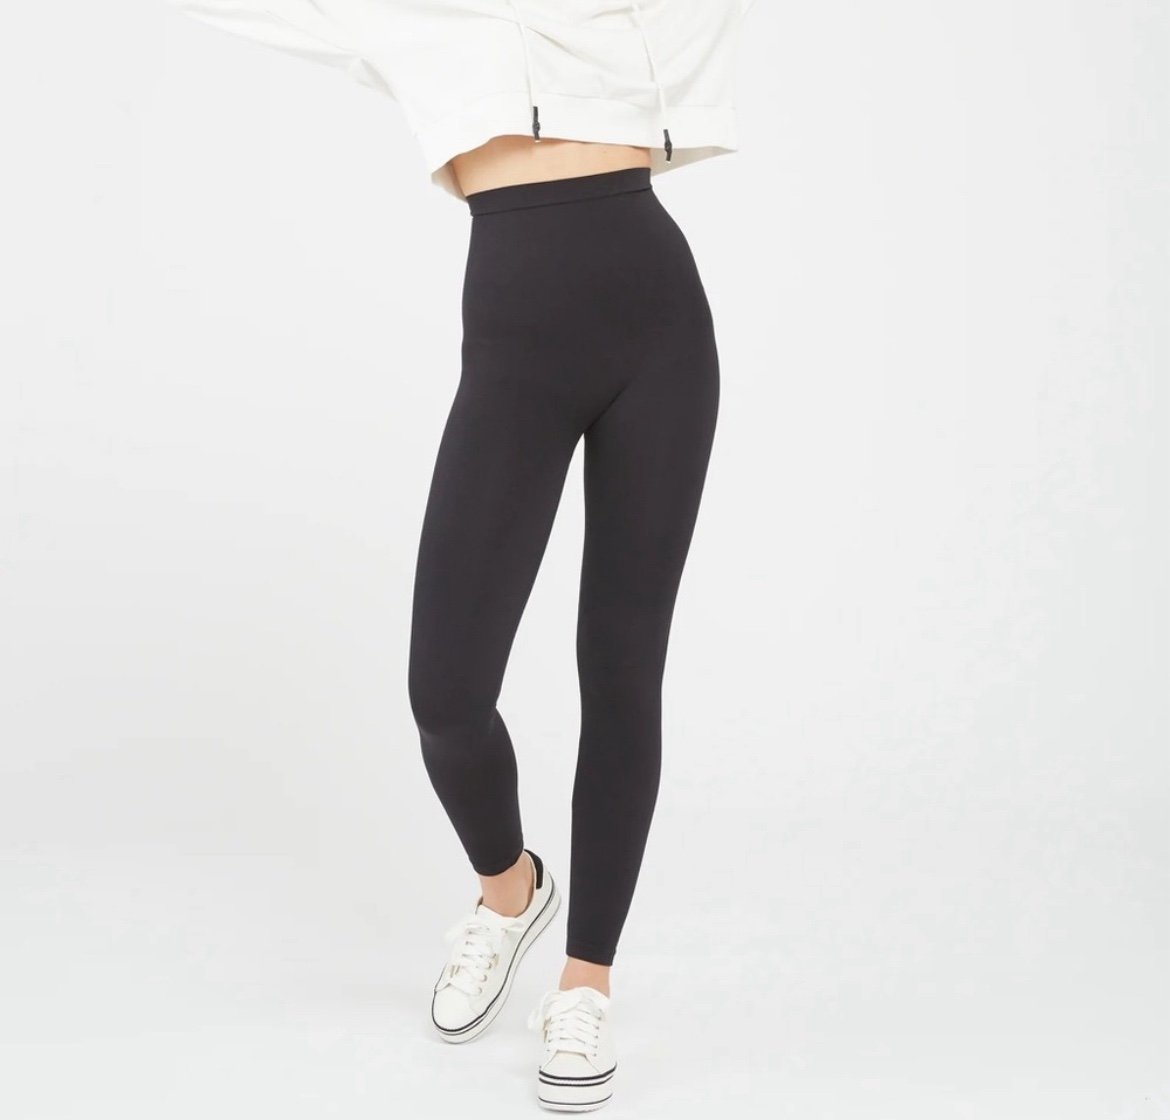 Spanx Look at Me Now High-Waisted Seamless Leggings kiQxI1fVz